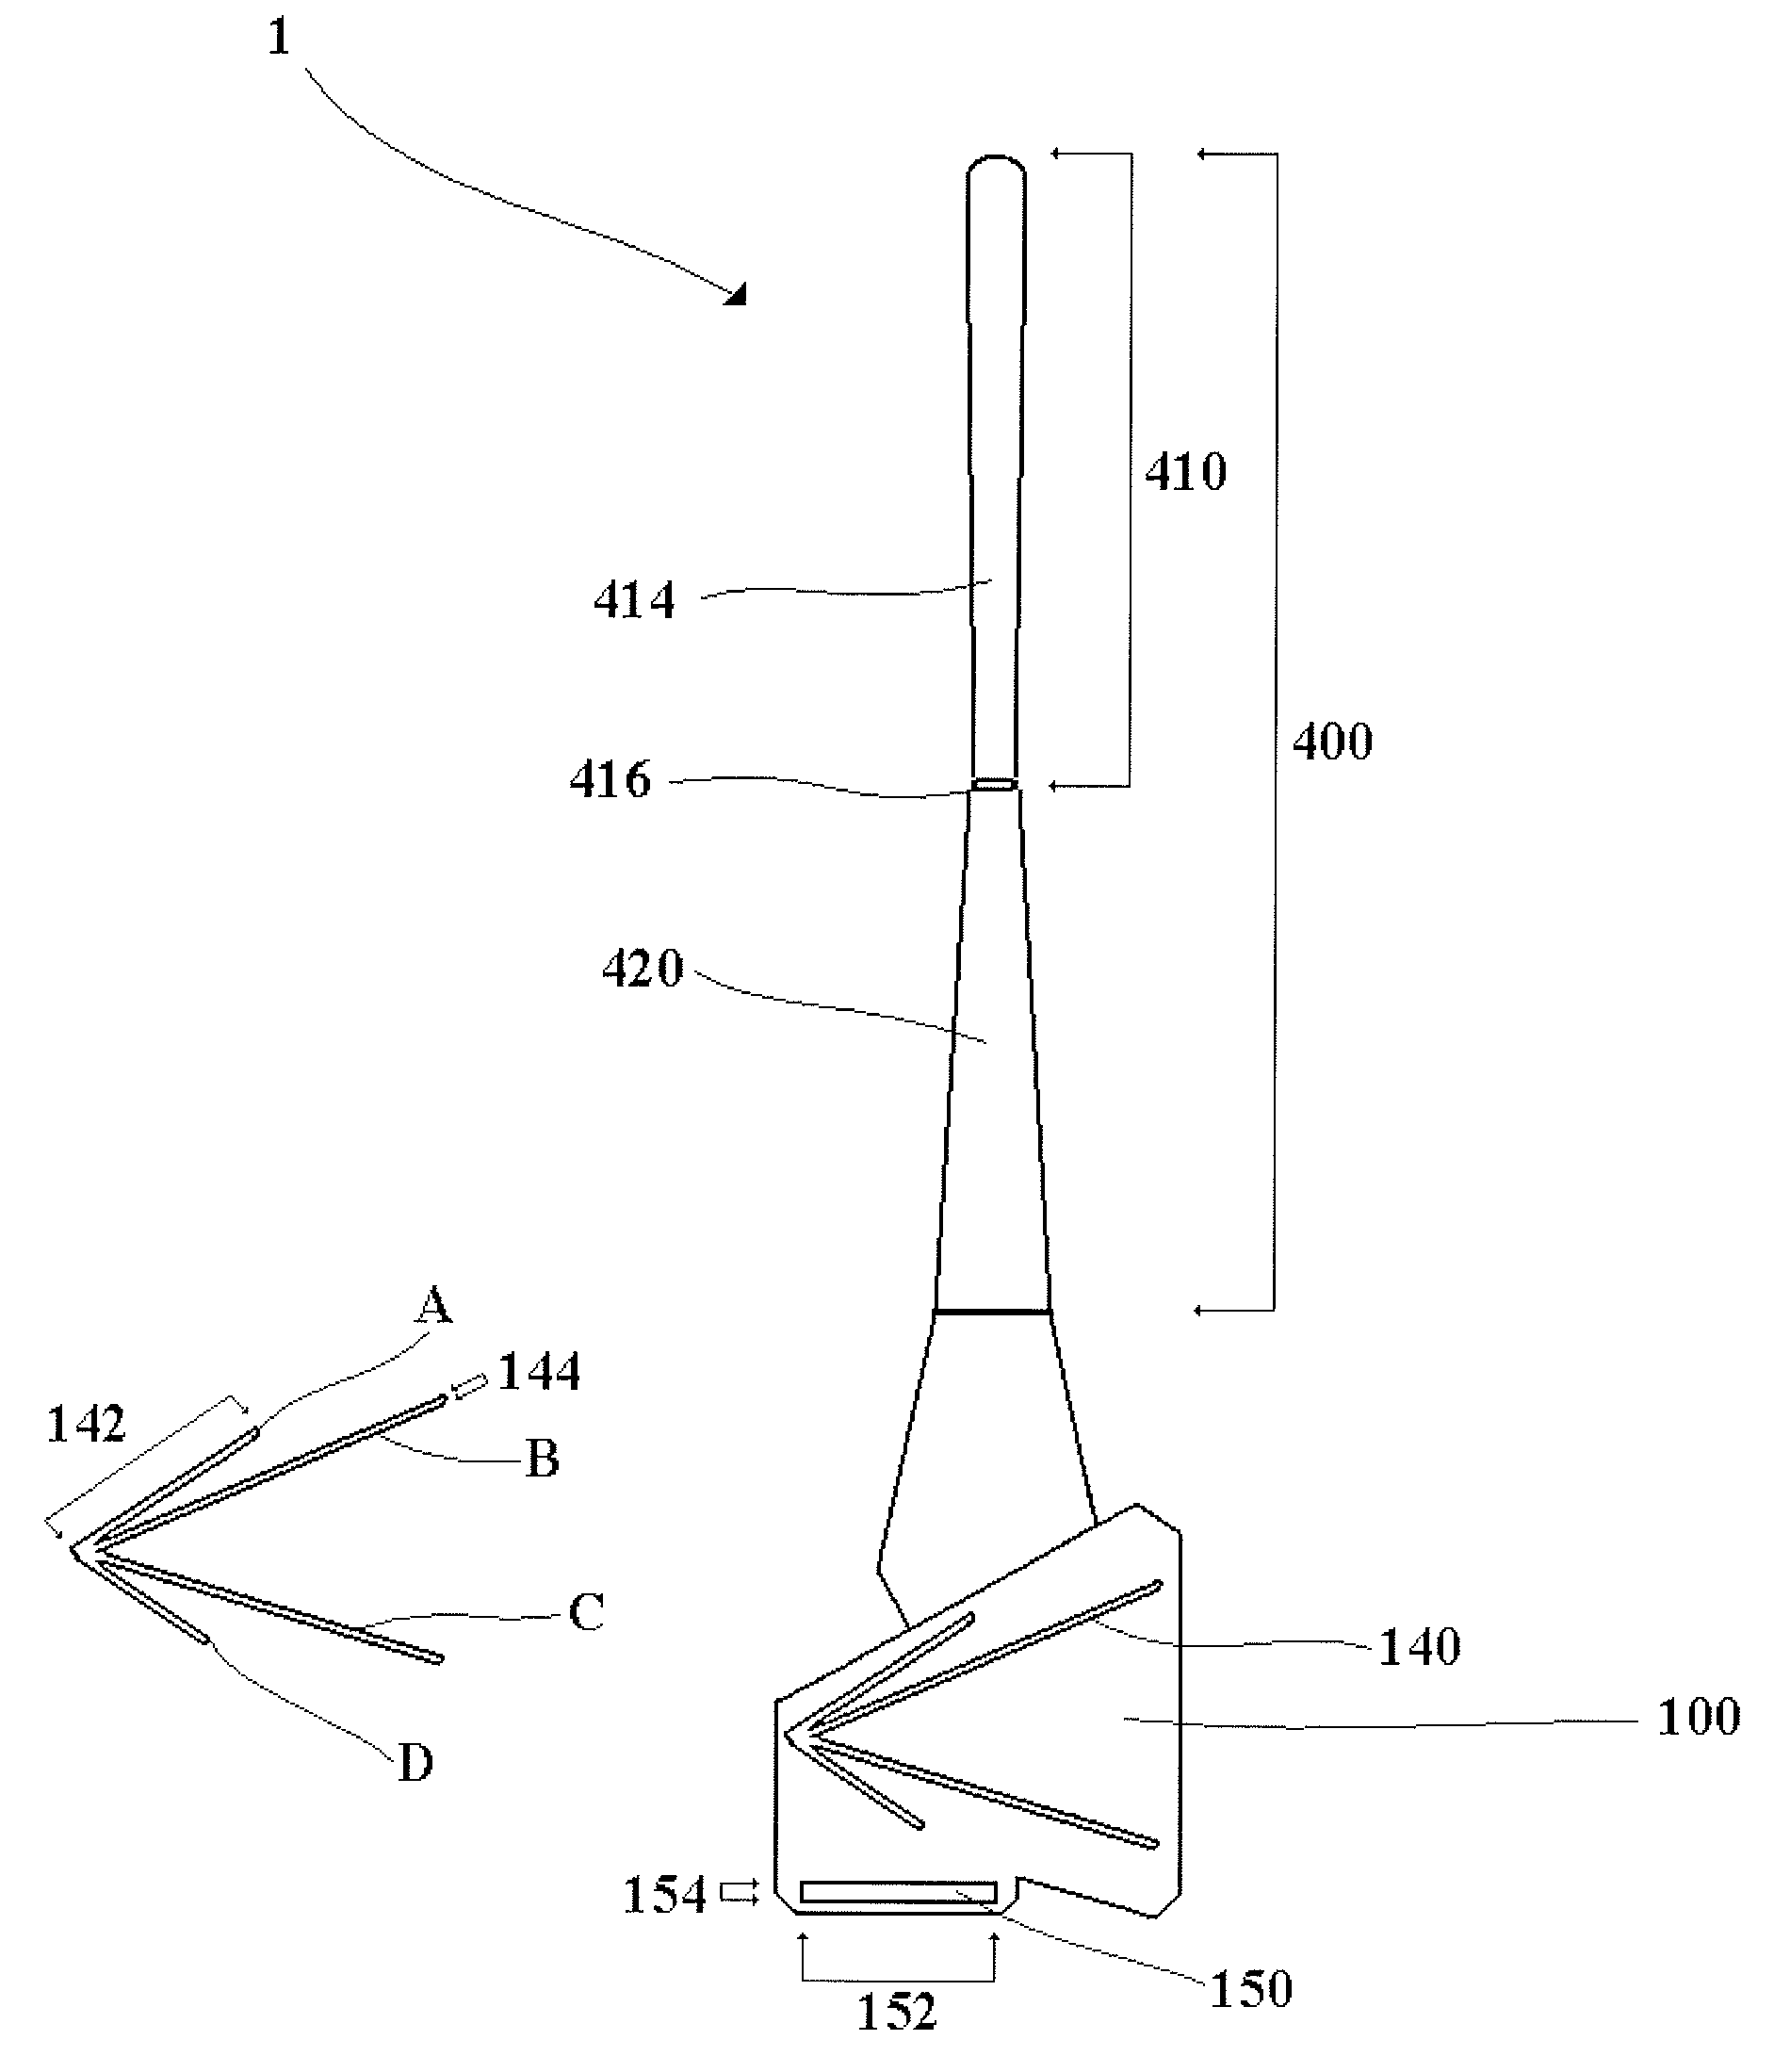 Self-supporting osteotomy guide and retraction device and method of use